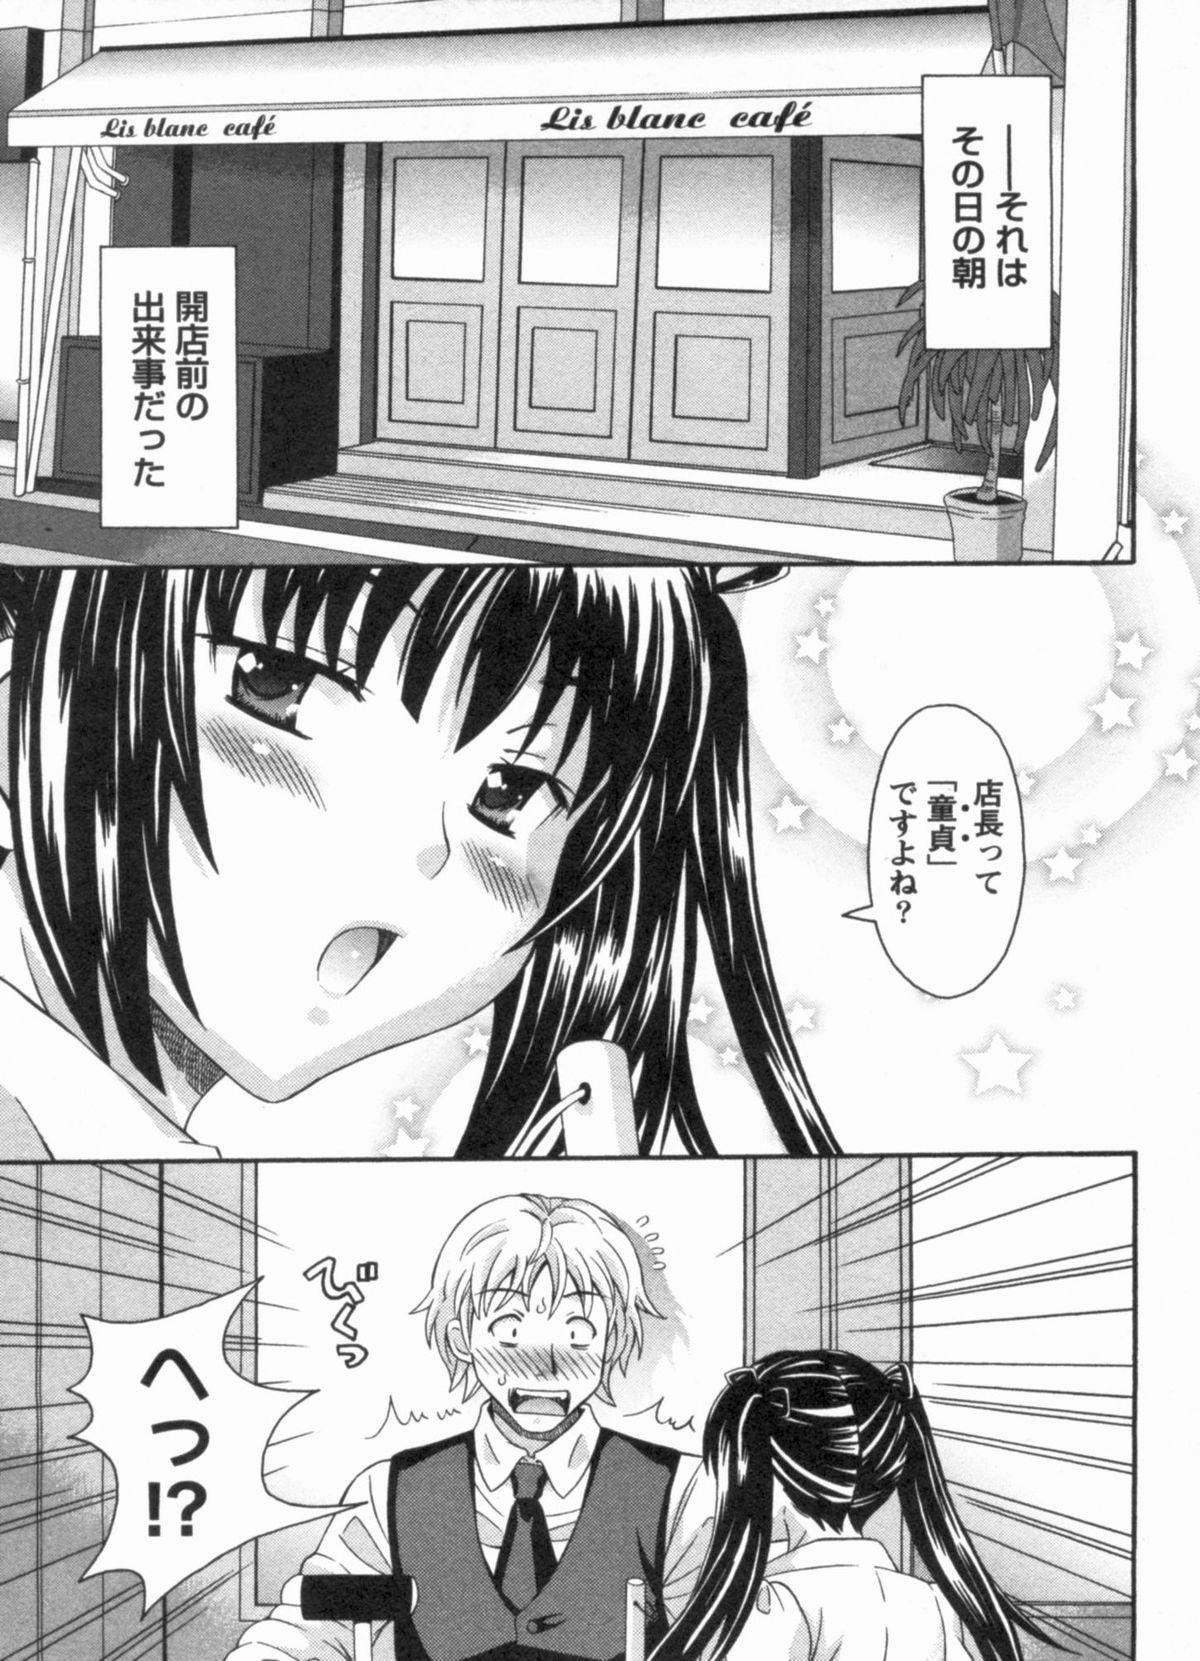 Asians Koi Cafe ni Youkoso!! 1 - Welcome to Love&cafe!! 1 Double Blowjob - Page 11